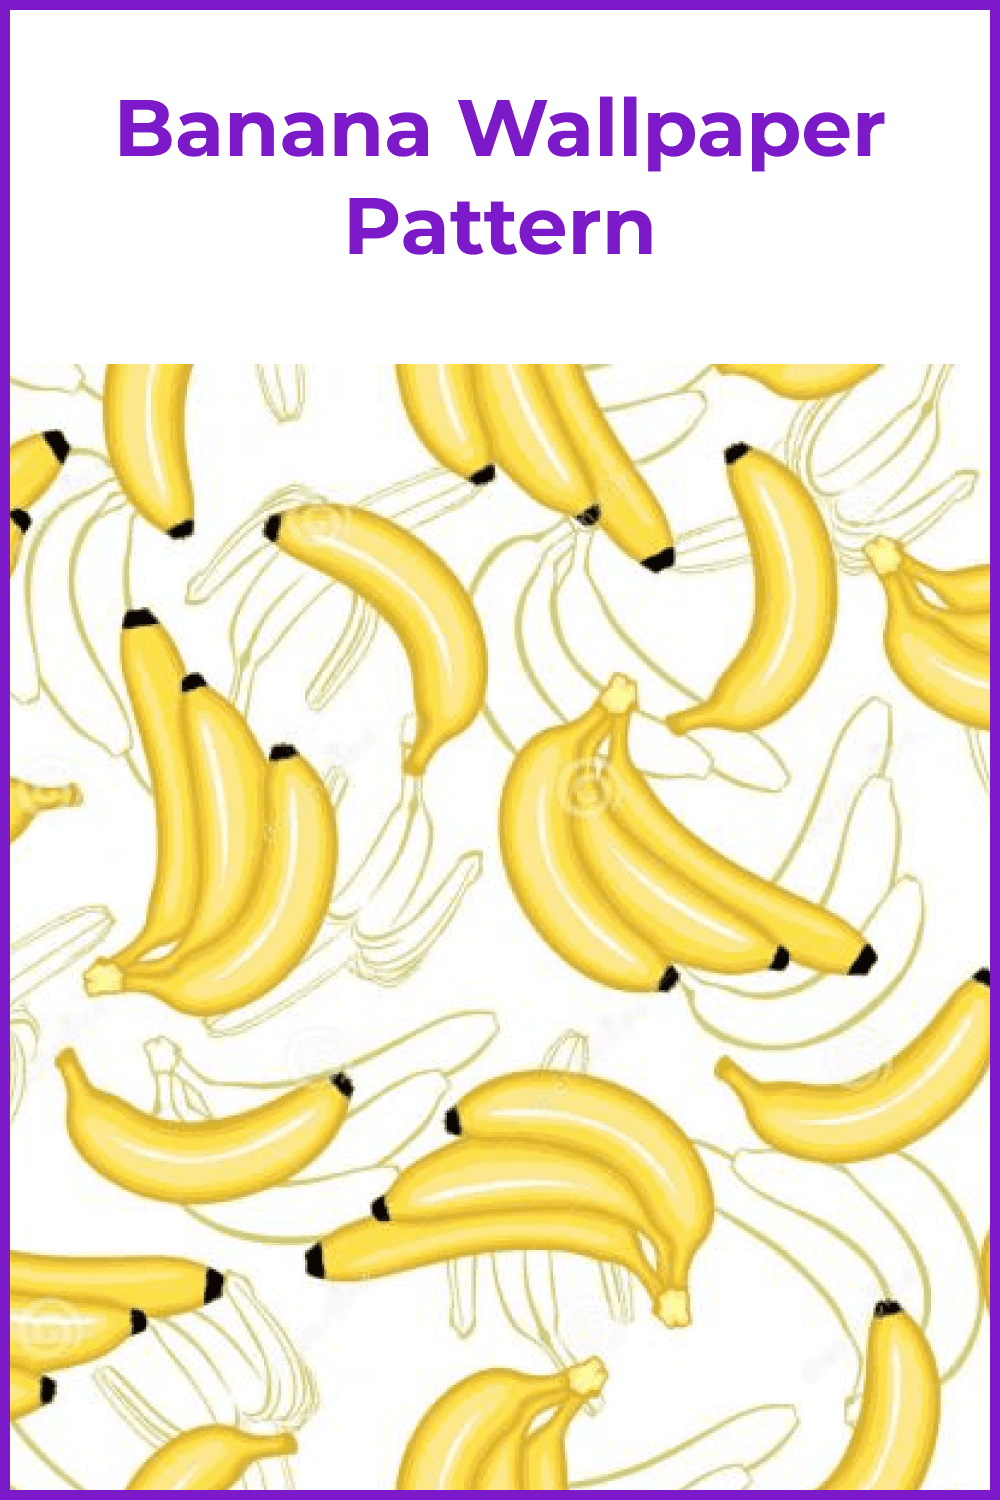 Yellow bananas in the white context.